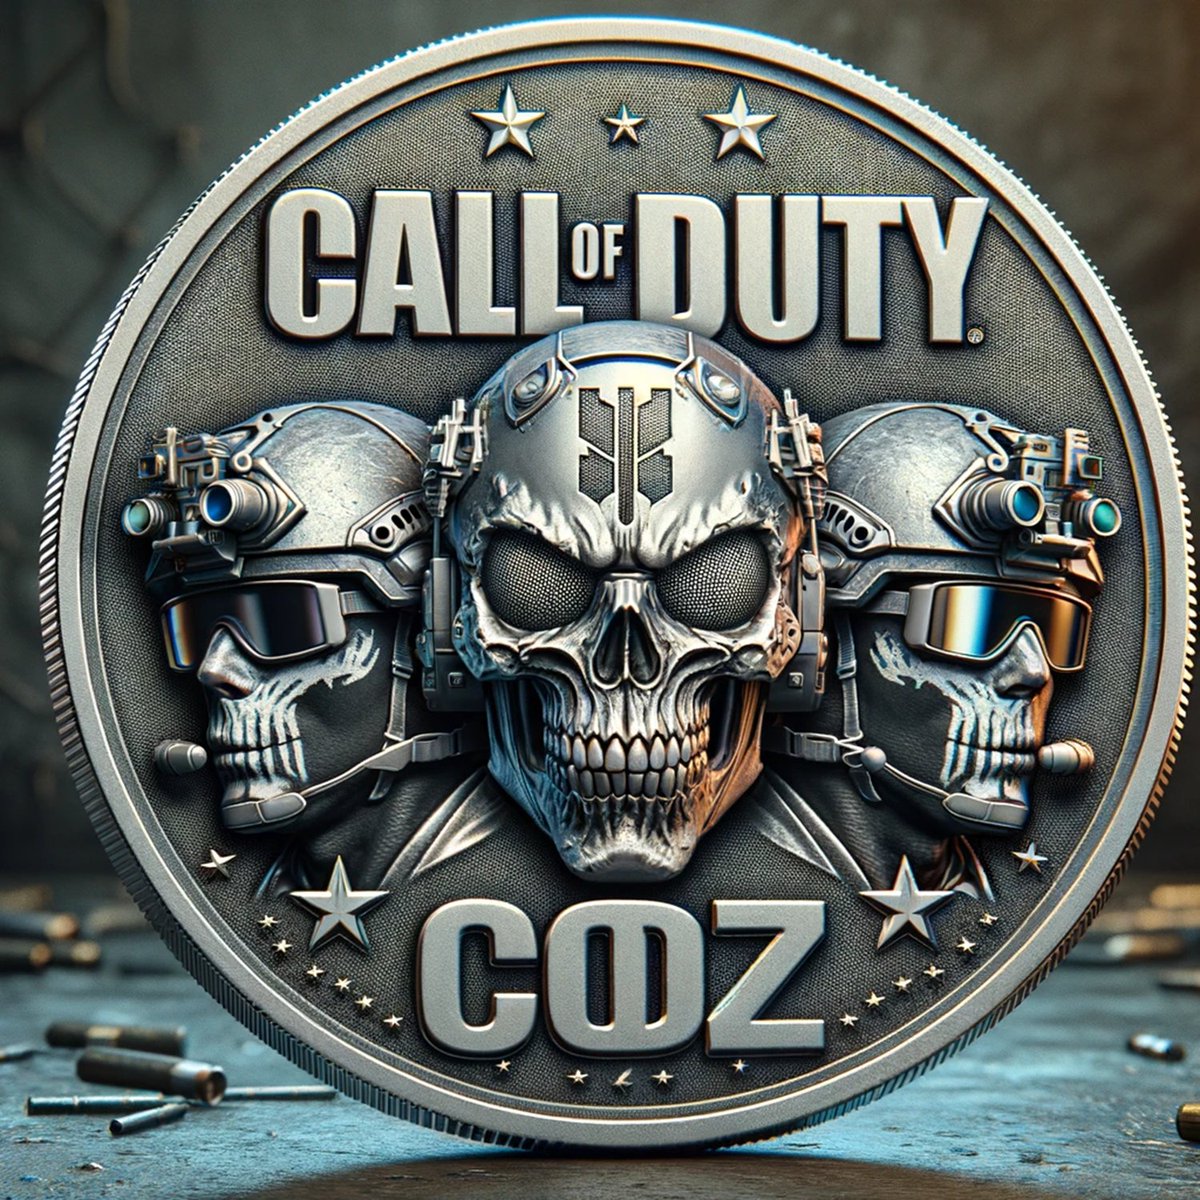 💥💥💎Here it is! The Airdrop 💎💥💥💥 Qualify for $CODZ drop. 100 randomly picked followers! Requirements are : 1. Comment your gaming tag & console 🎮💥 2. Follow us on X, RT & Like ✖️ 3. Join our Telegram ✉️ Lucky winners will be picked and DM'd for address details.